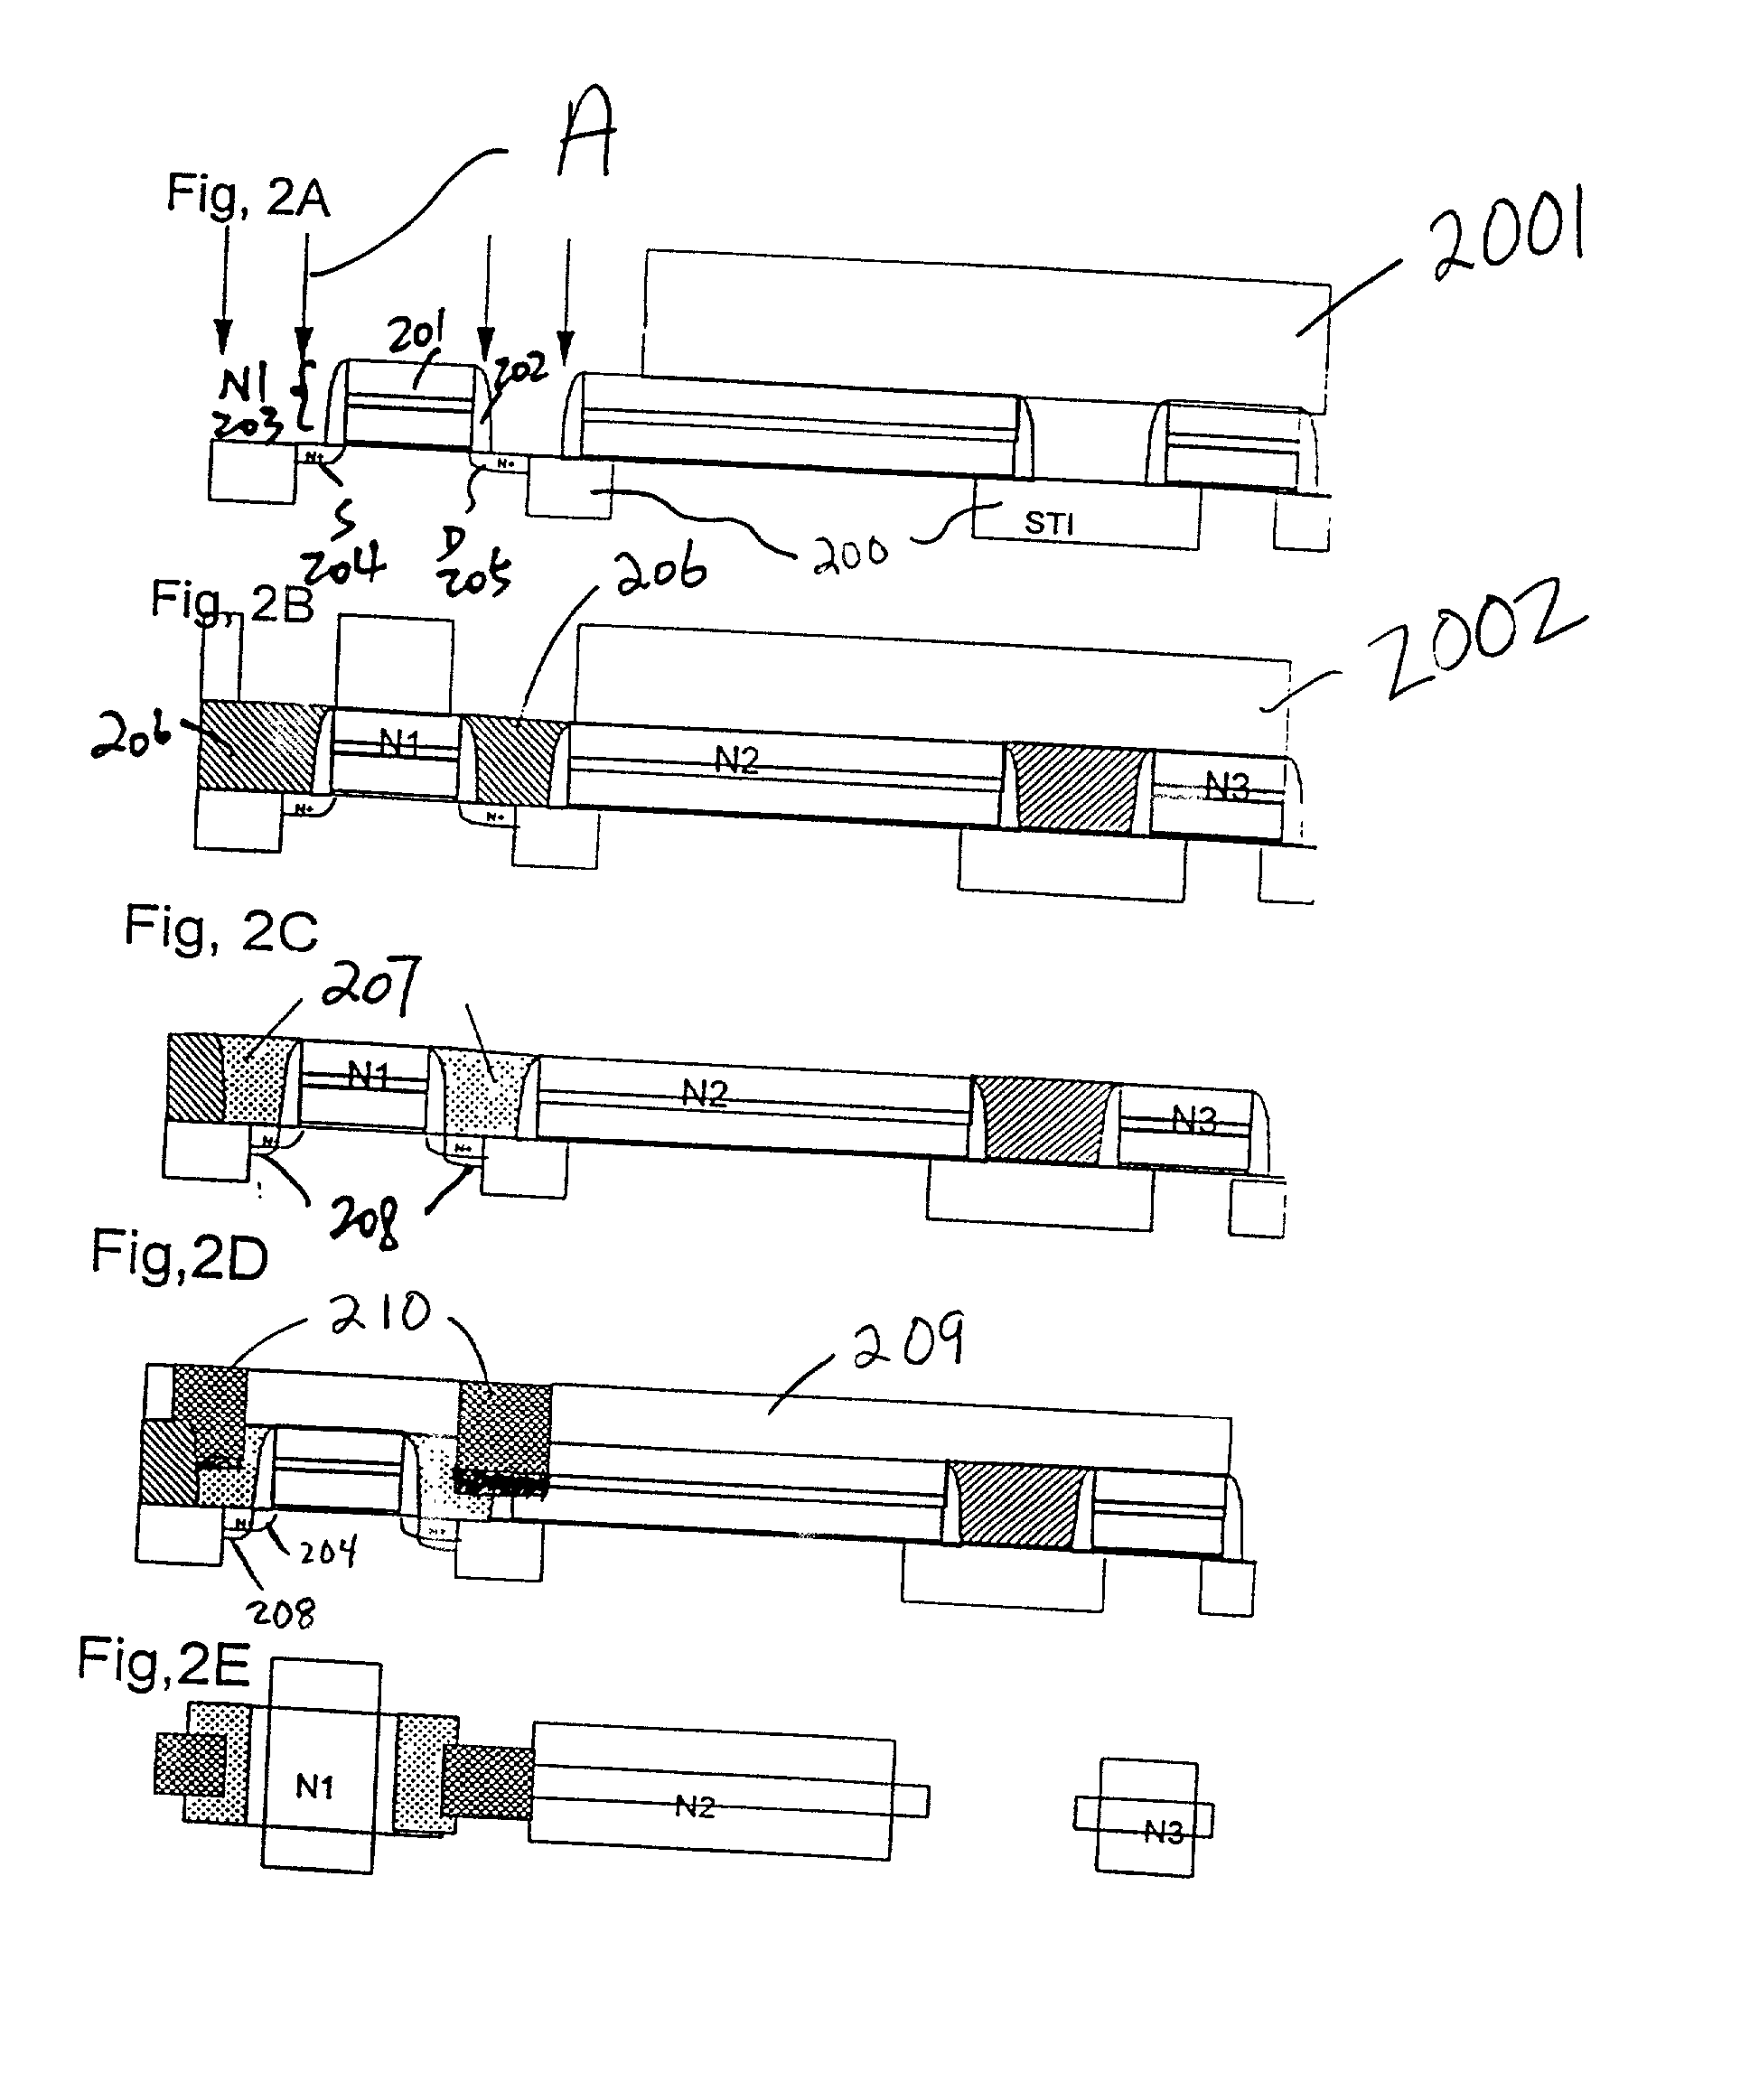 N-channel metal oxide semiconductor (NMOS) driver circuit and method of making same